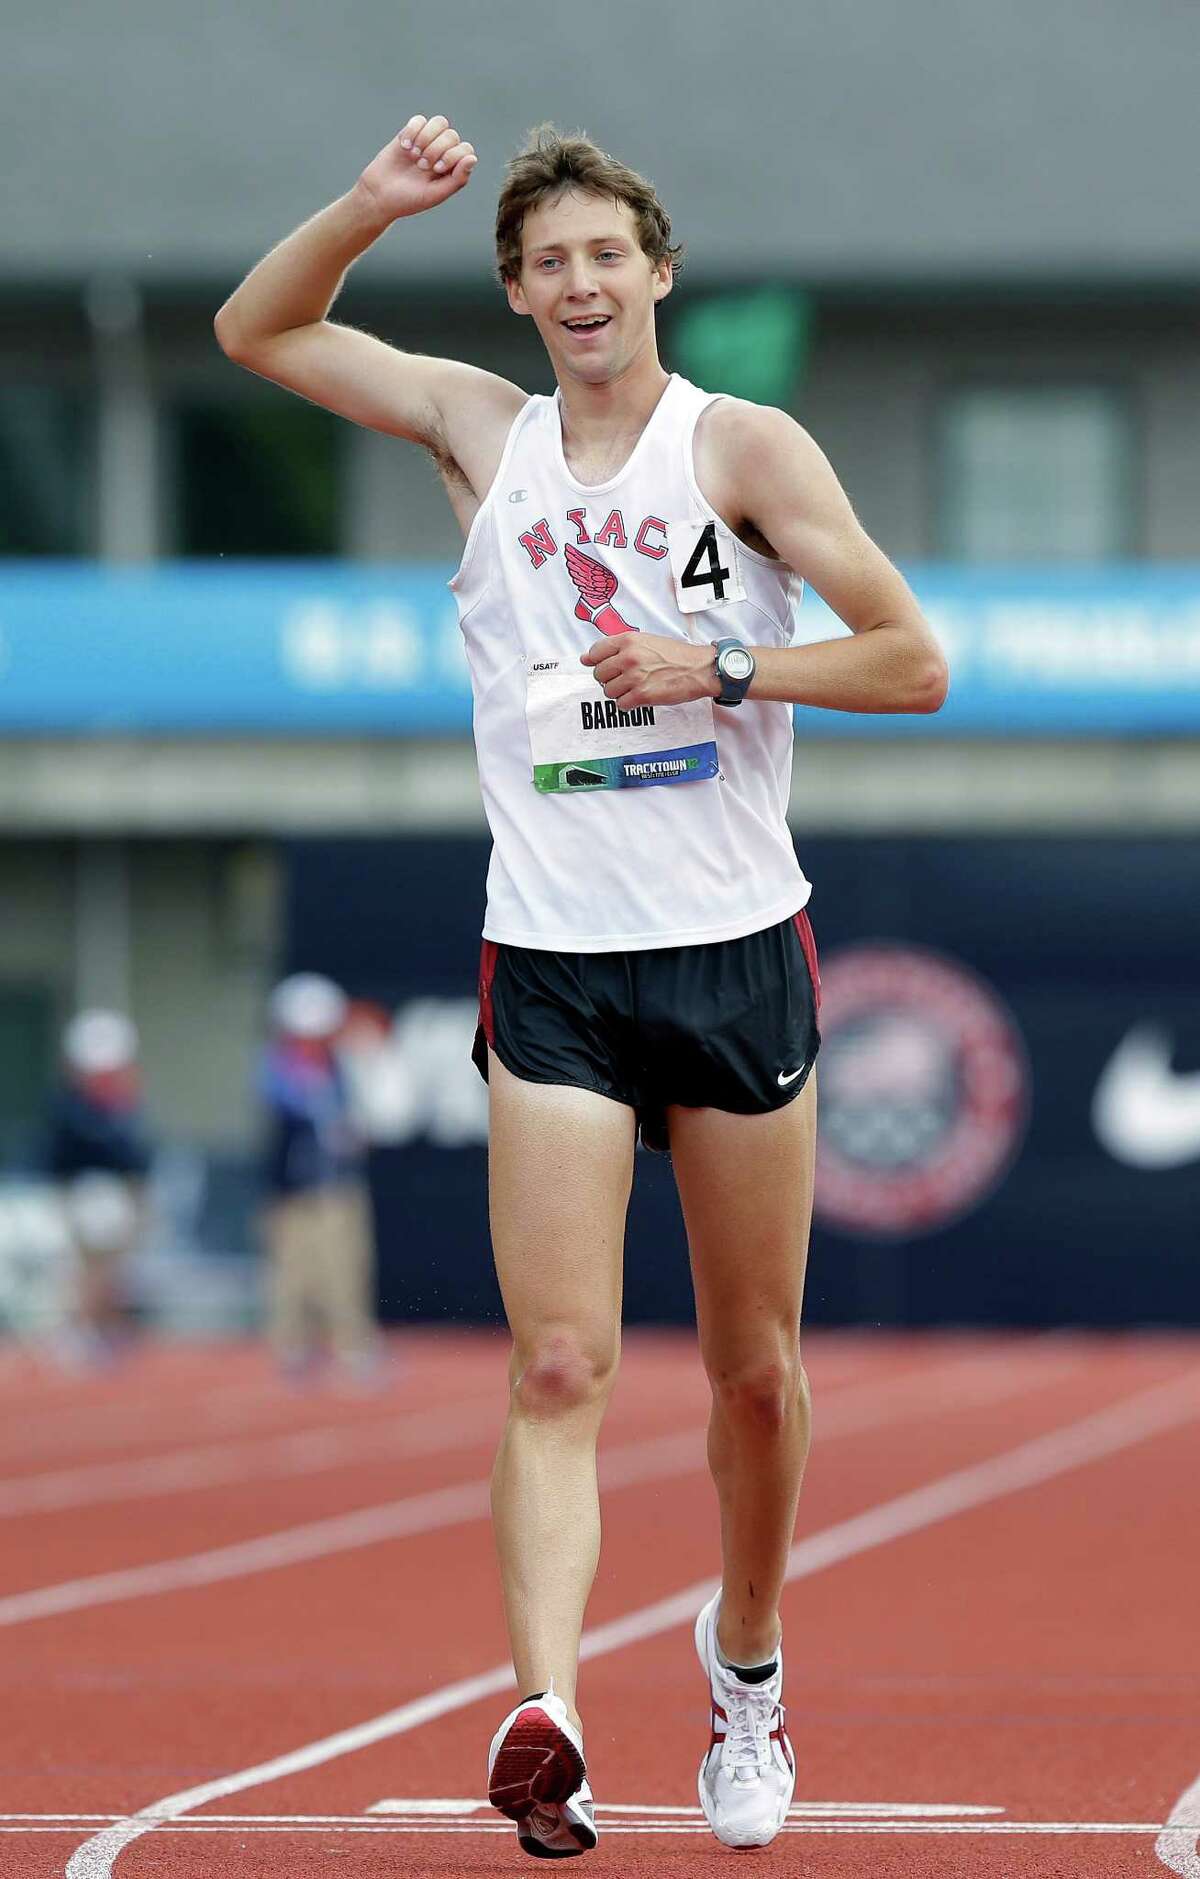 Trevor Barron celebrates as he crosses the finish line winning the men's 20 kilometer race walk at the U.S. Olympic Track and Field Trials athletics, Saturday, June 30, 2012, in Eugene, Ore. Barron won with a time of 1:23:00.10. (AP Photo/Eric Gay)